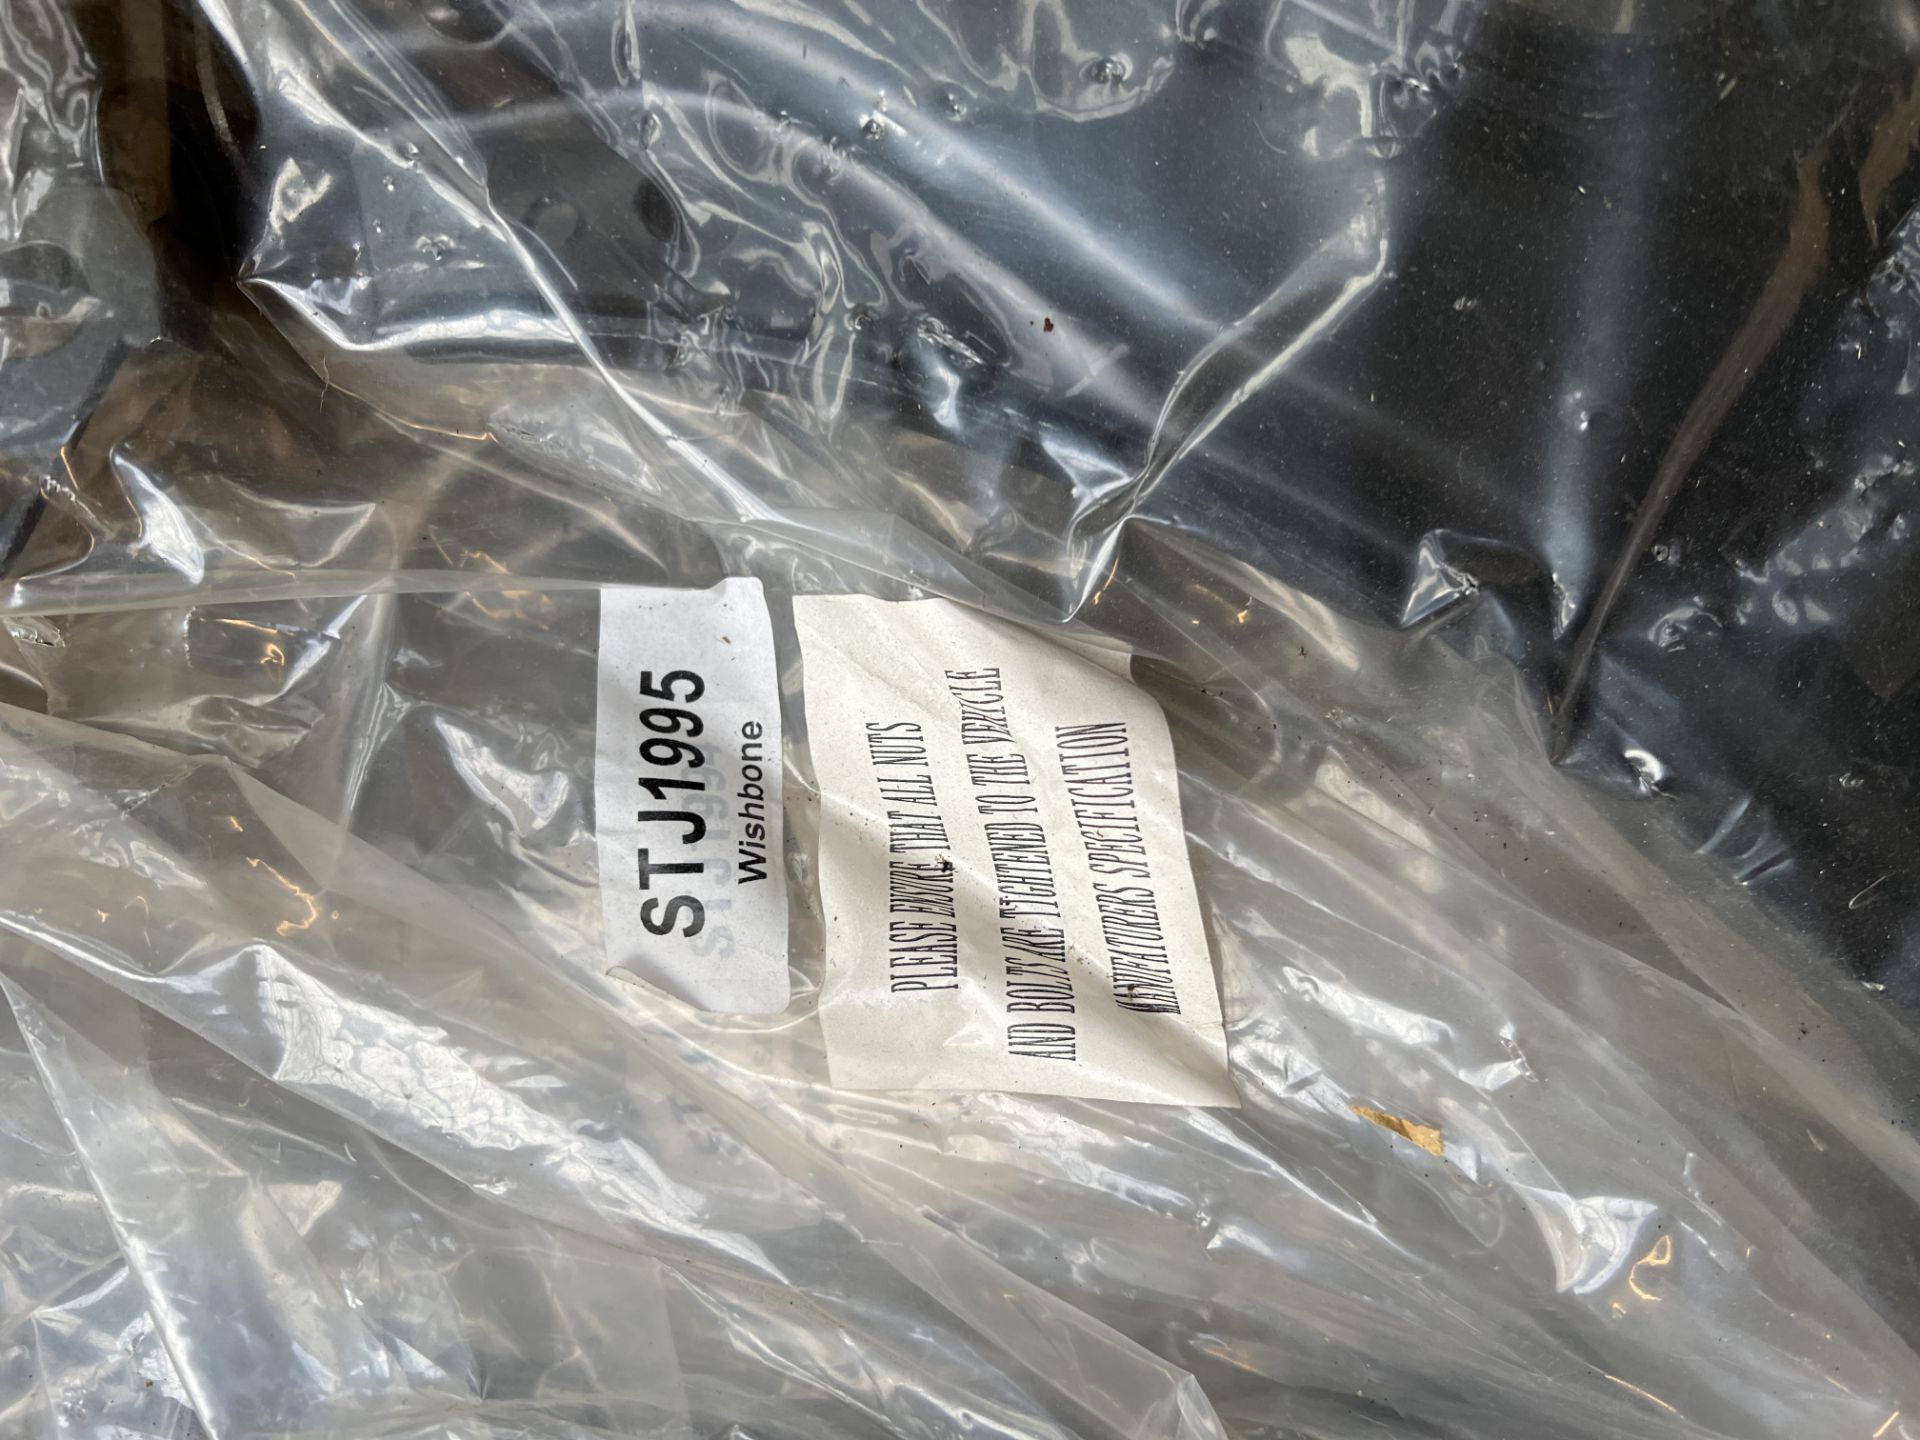 One Crate of approx 91 FCA5582 L/H Suspension Arms for BMW 5 Series - circa £40 online value - Image 2 of 3